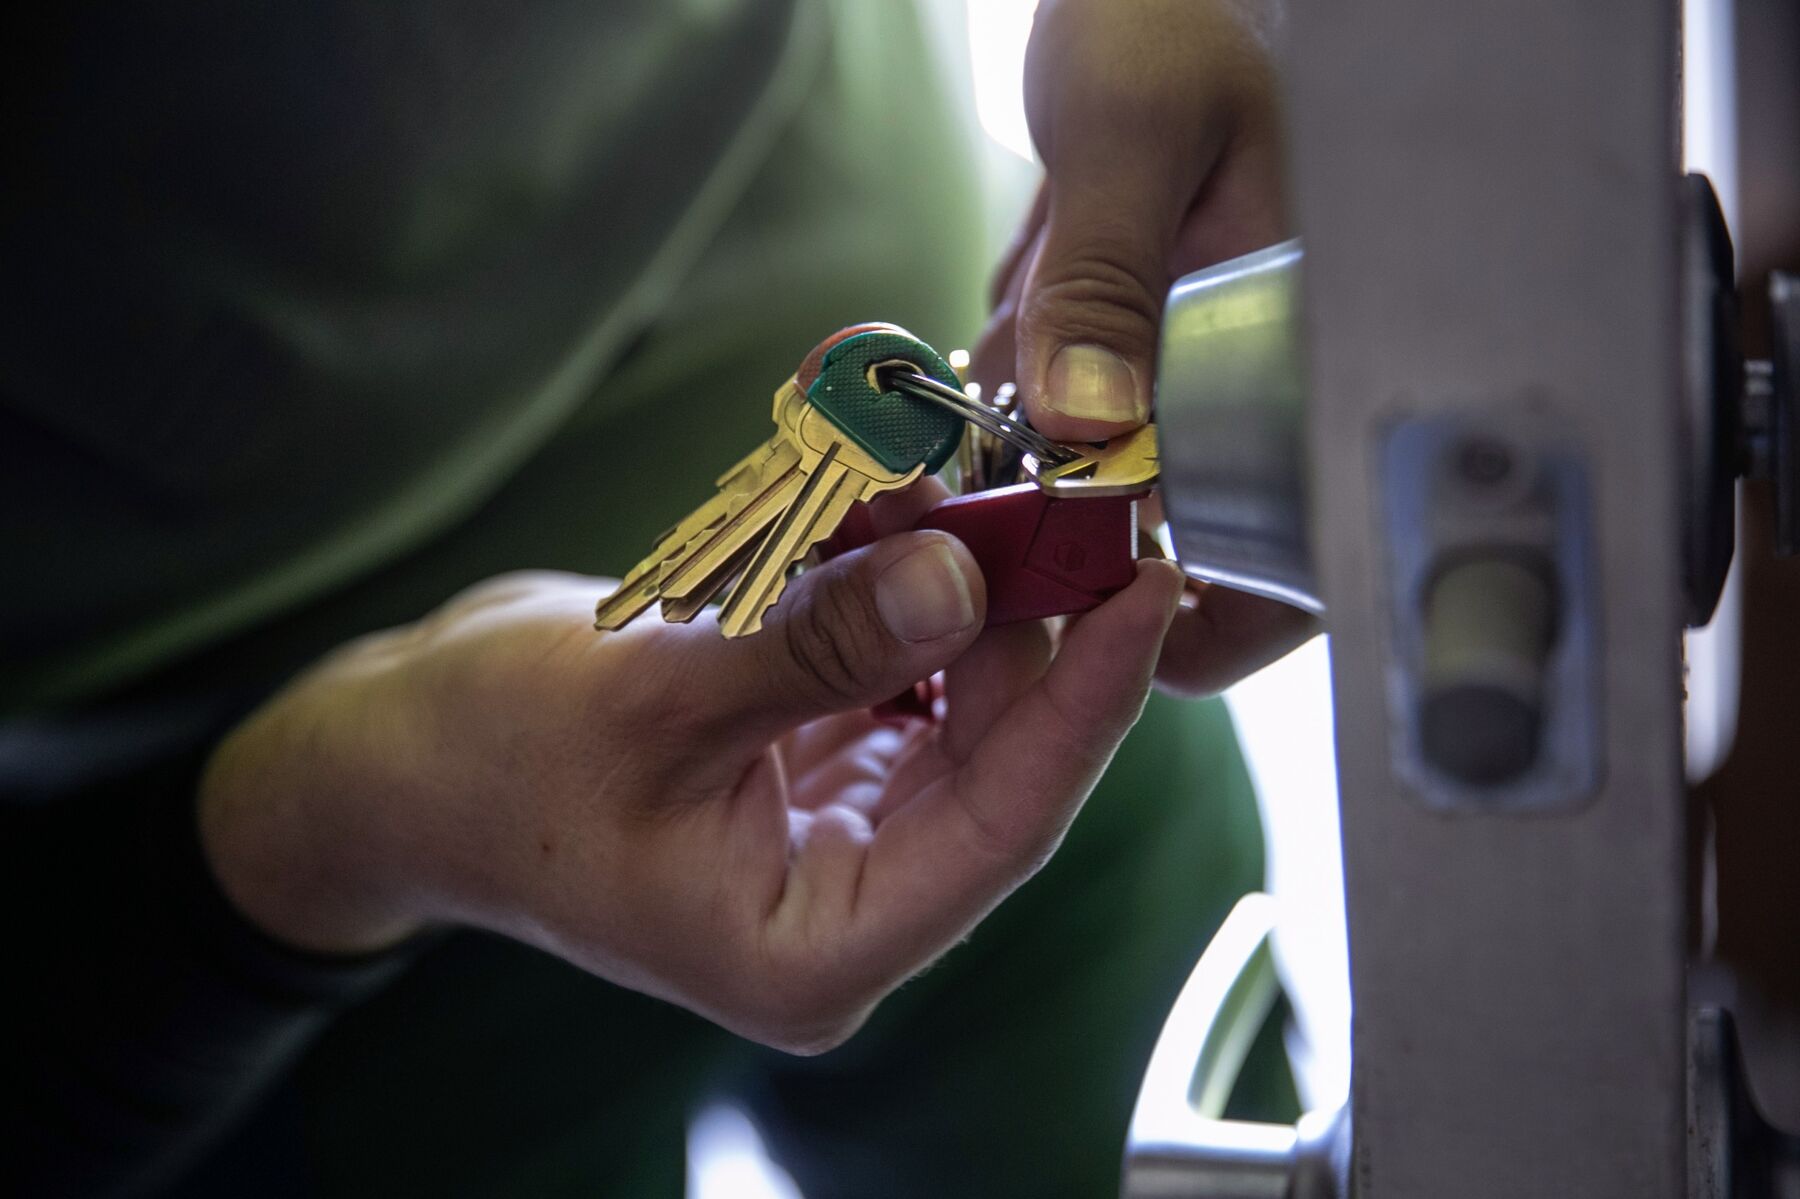 An apartment maintenance worker changes the lock of an apartment after constables posted an eviction order in October 2020 in Phoenix, Arizona. 